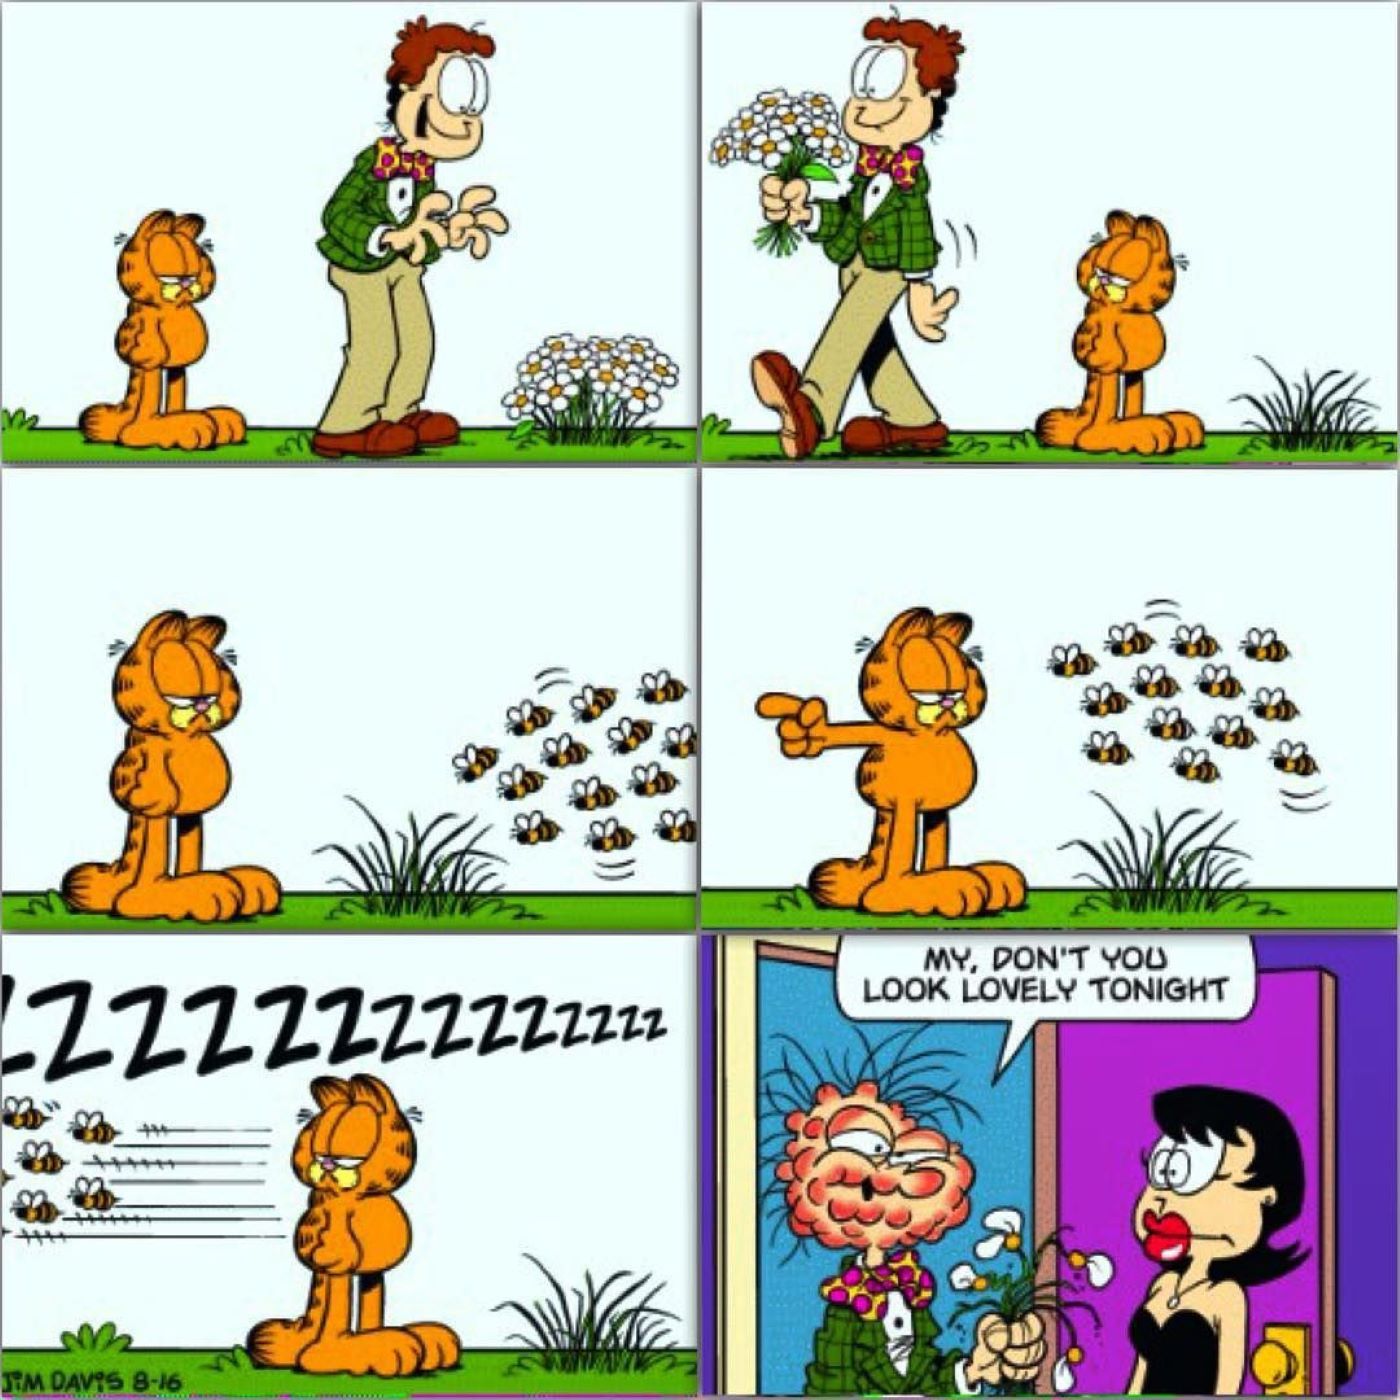 Jon Arbuckle has a date, but he's stung by a swarm of bees on his way there